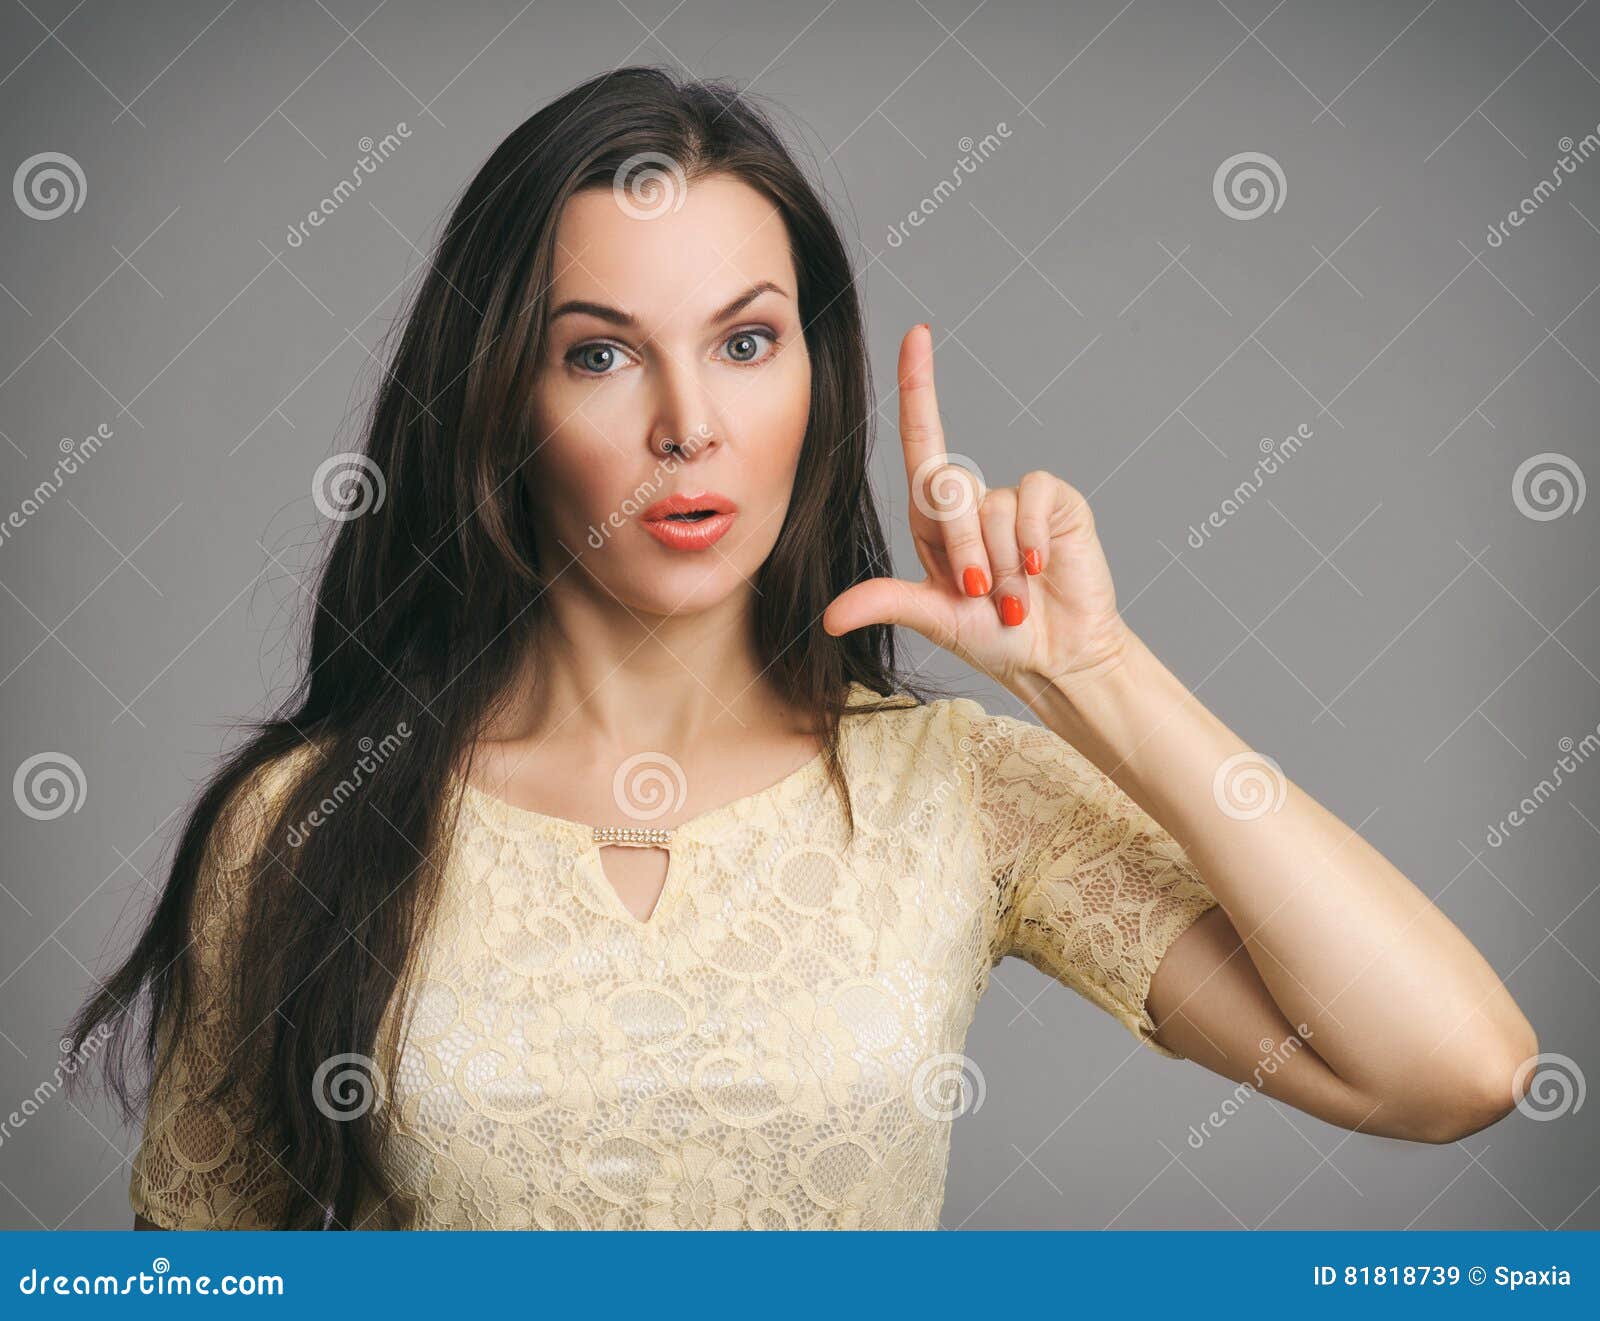 Surprised Beautiful Woman Pointing Up Her Finger Stock Image Image Of Emotions Amazed 81818739